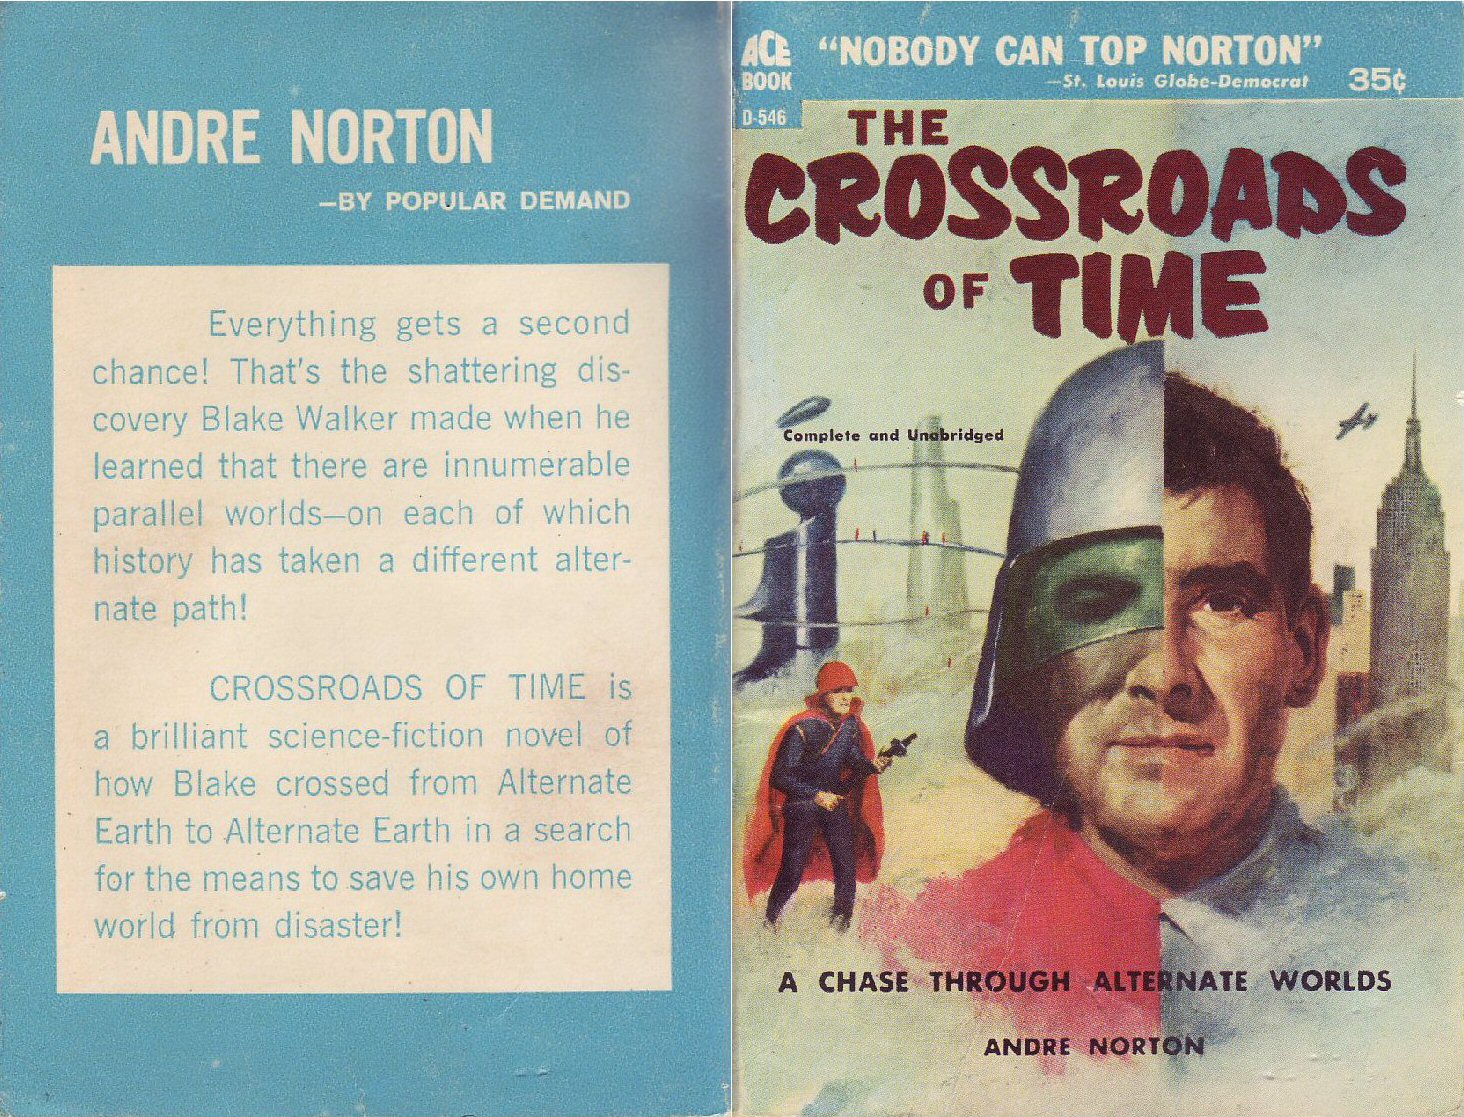 crossroads of time 1962 d 546